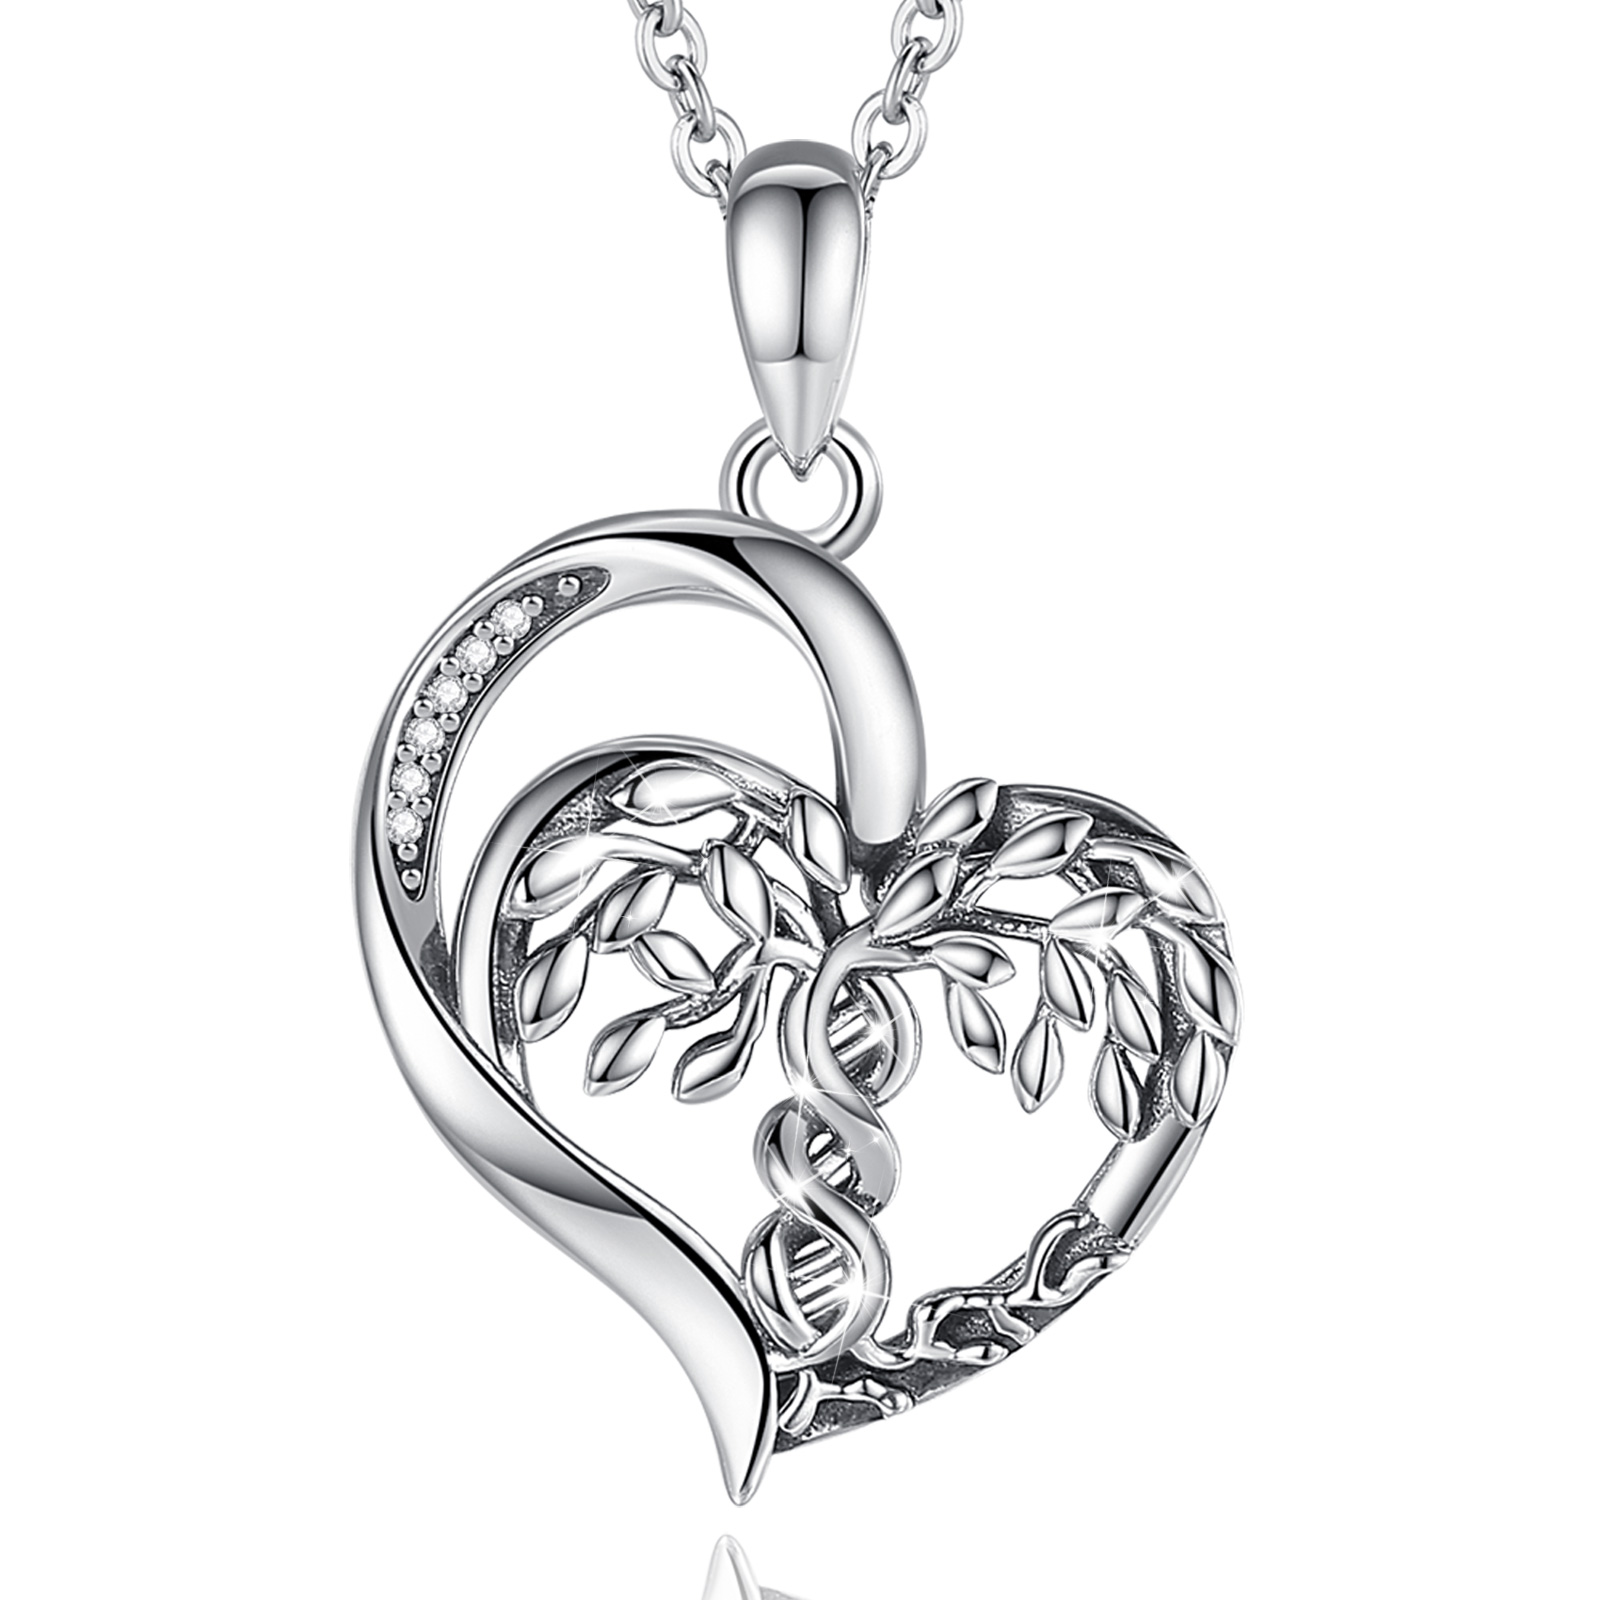 Merryshine Jewelry Heart Shaped Personality Hollow S925 Sterling Silver Life of Tree Necklace